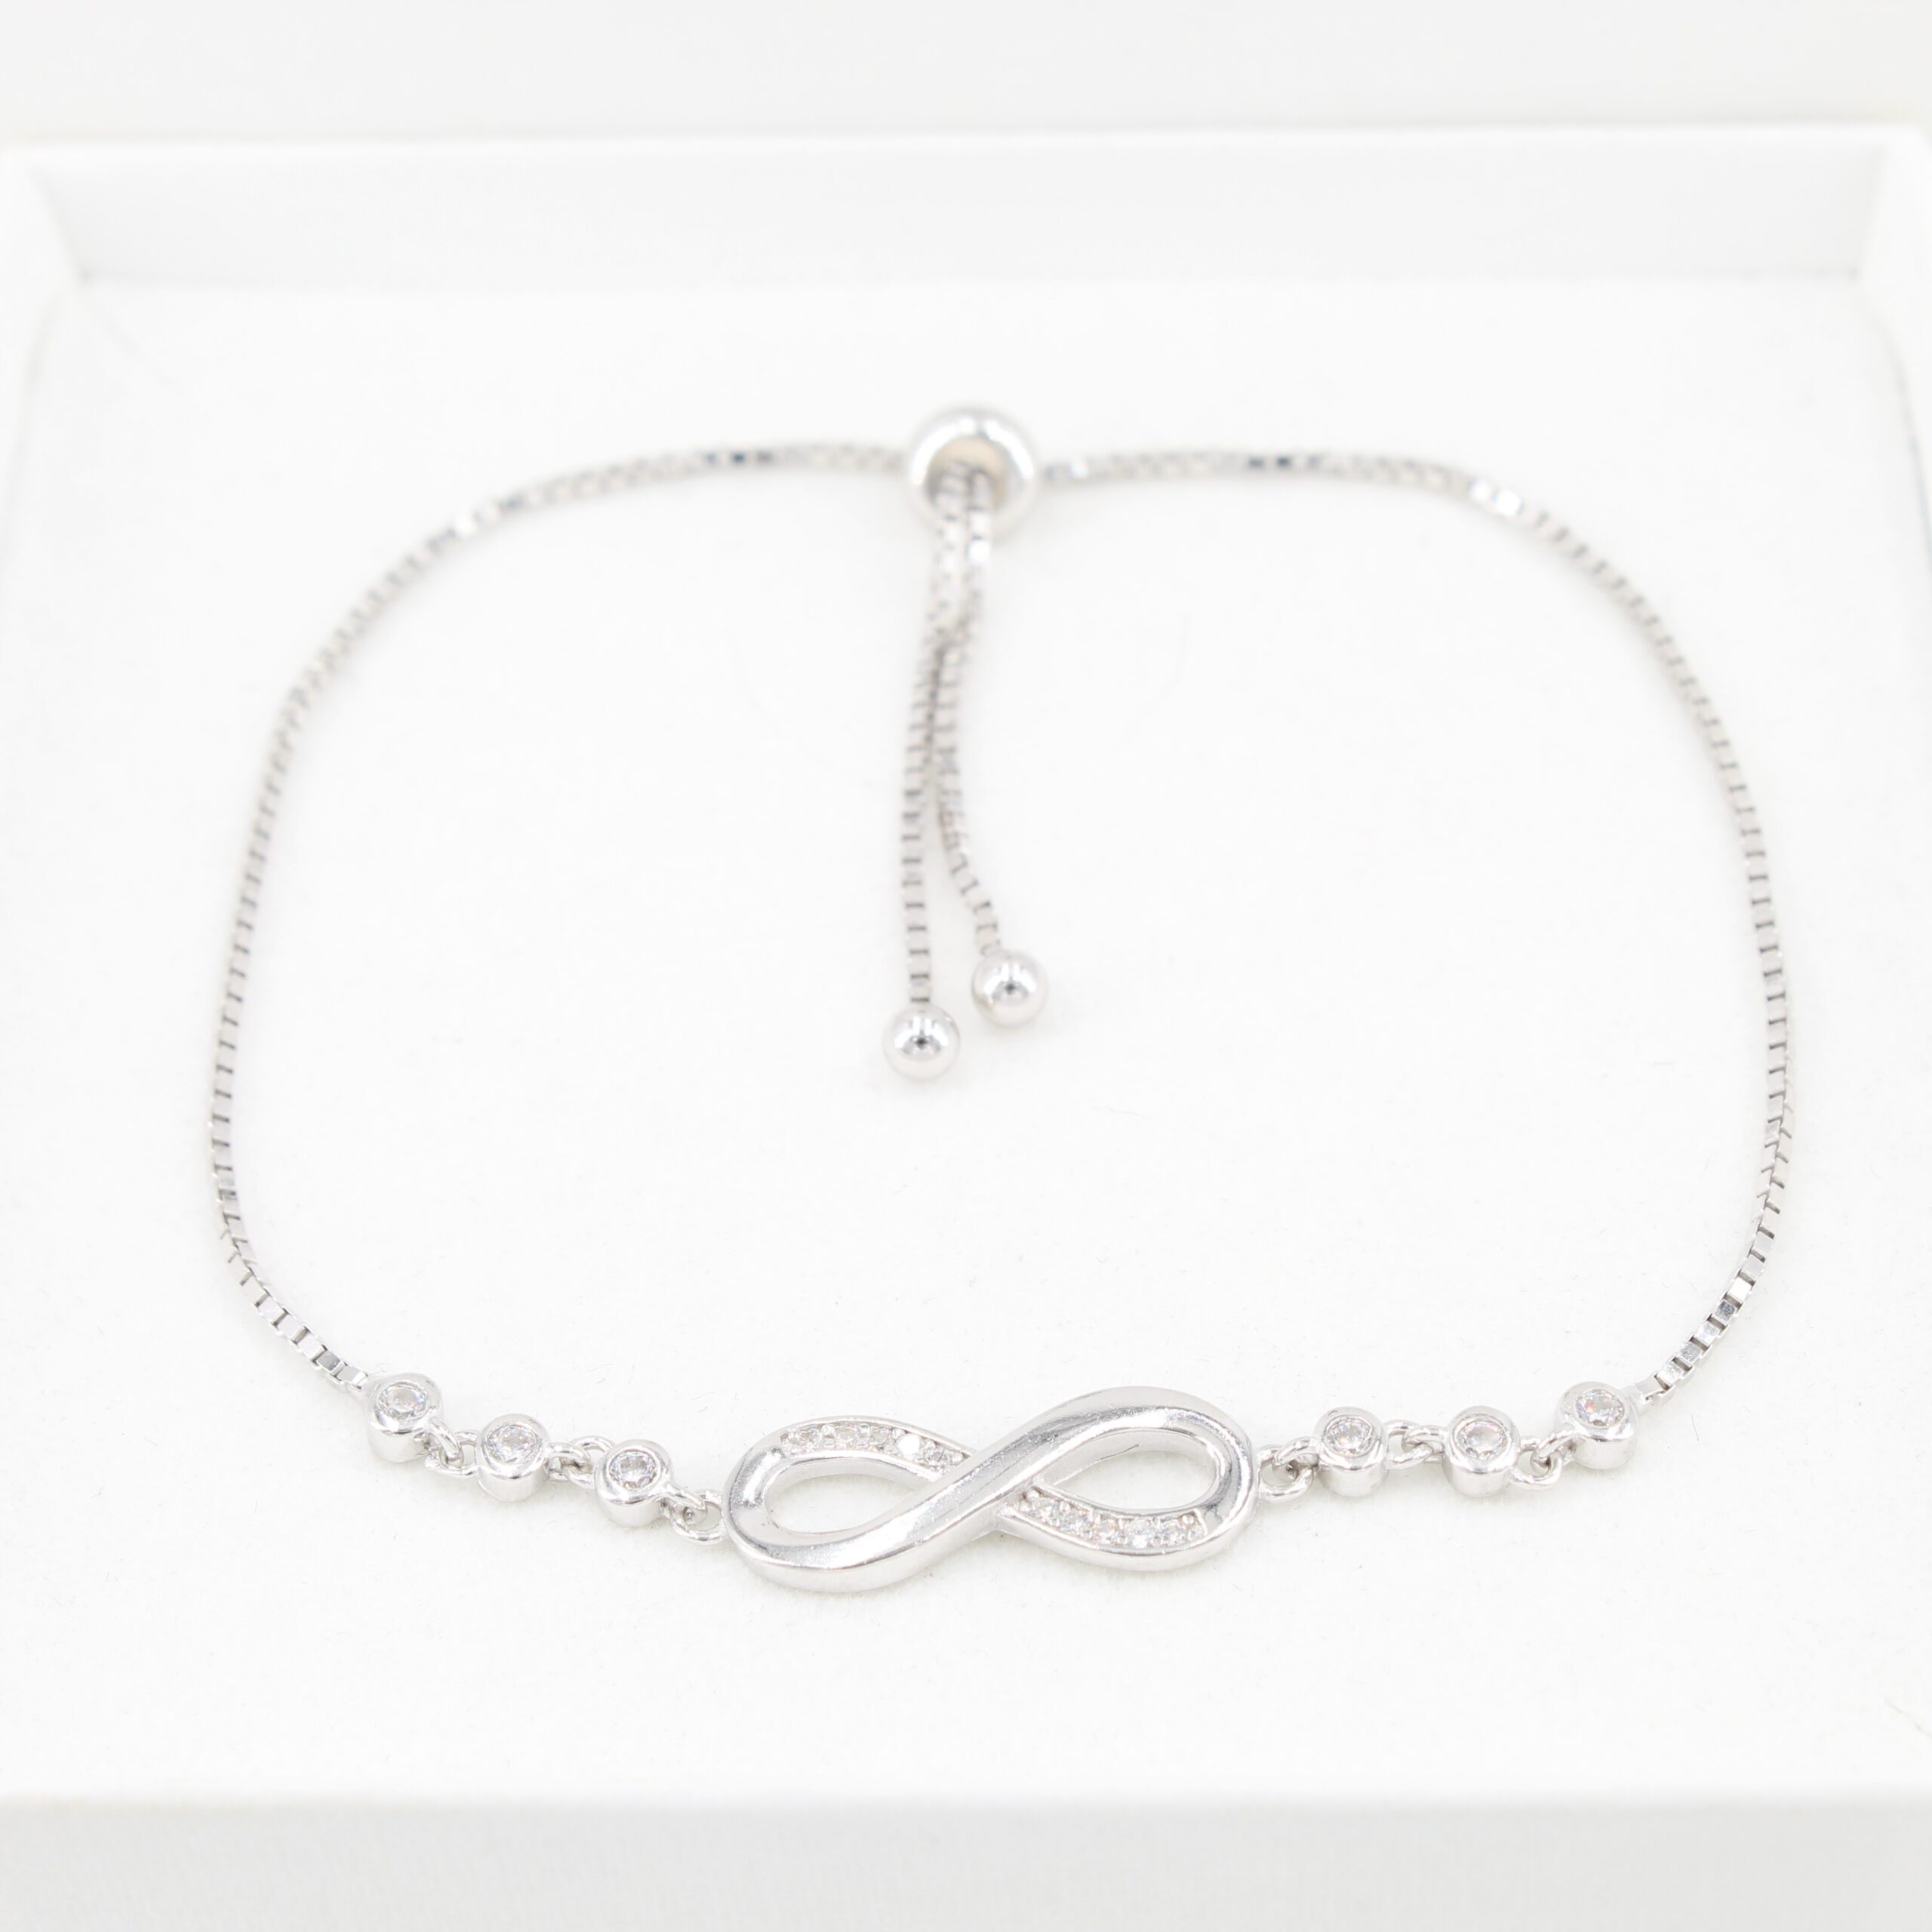 B02102 silber armband infinity mit steinen pic02 scaled